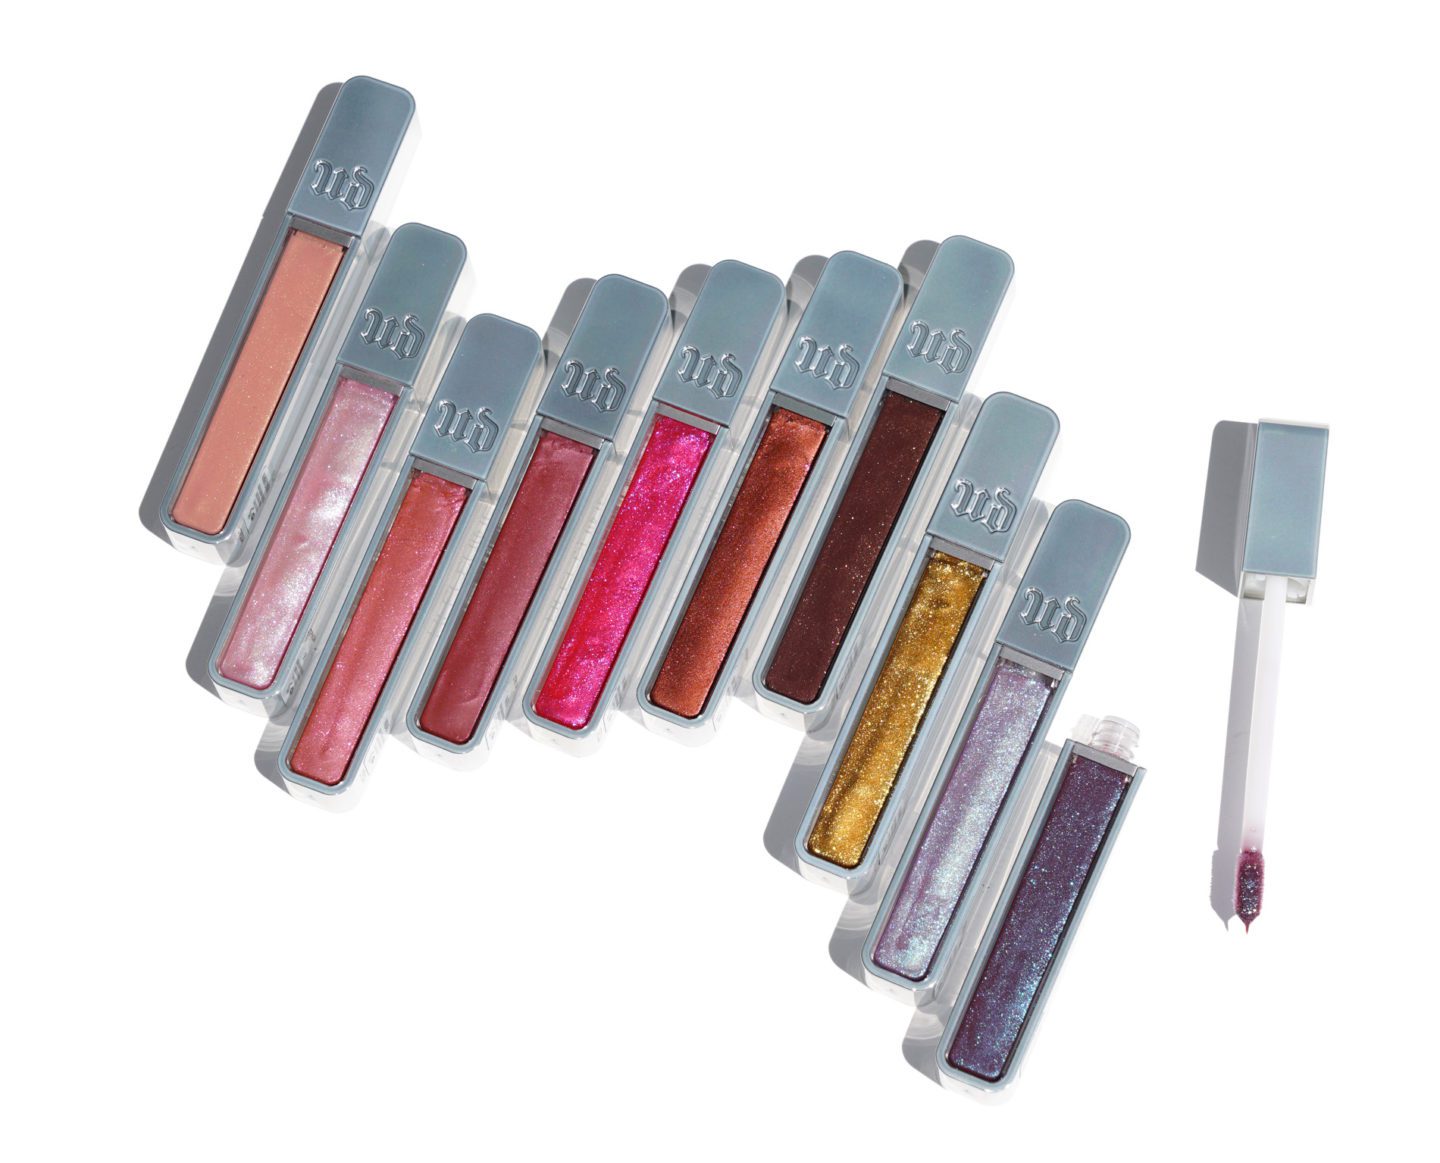 Urban Decay Hi-Fi Shine Lipgloss Below left to right: Midnight Cowgirl, SPL, Fireball, Naked, Big Bang, Dirty Talk, Shadow Heart, Goldmine, Candy Flip, Snapped